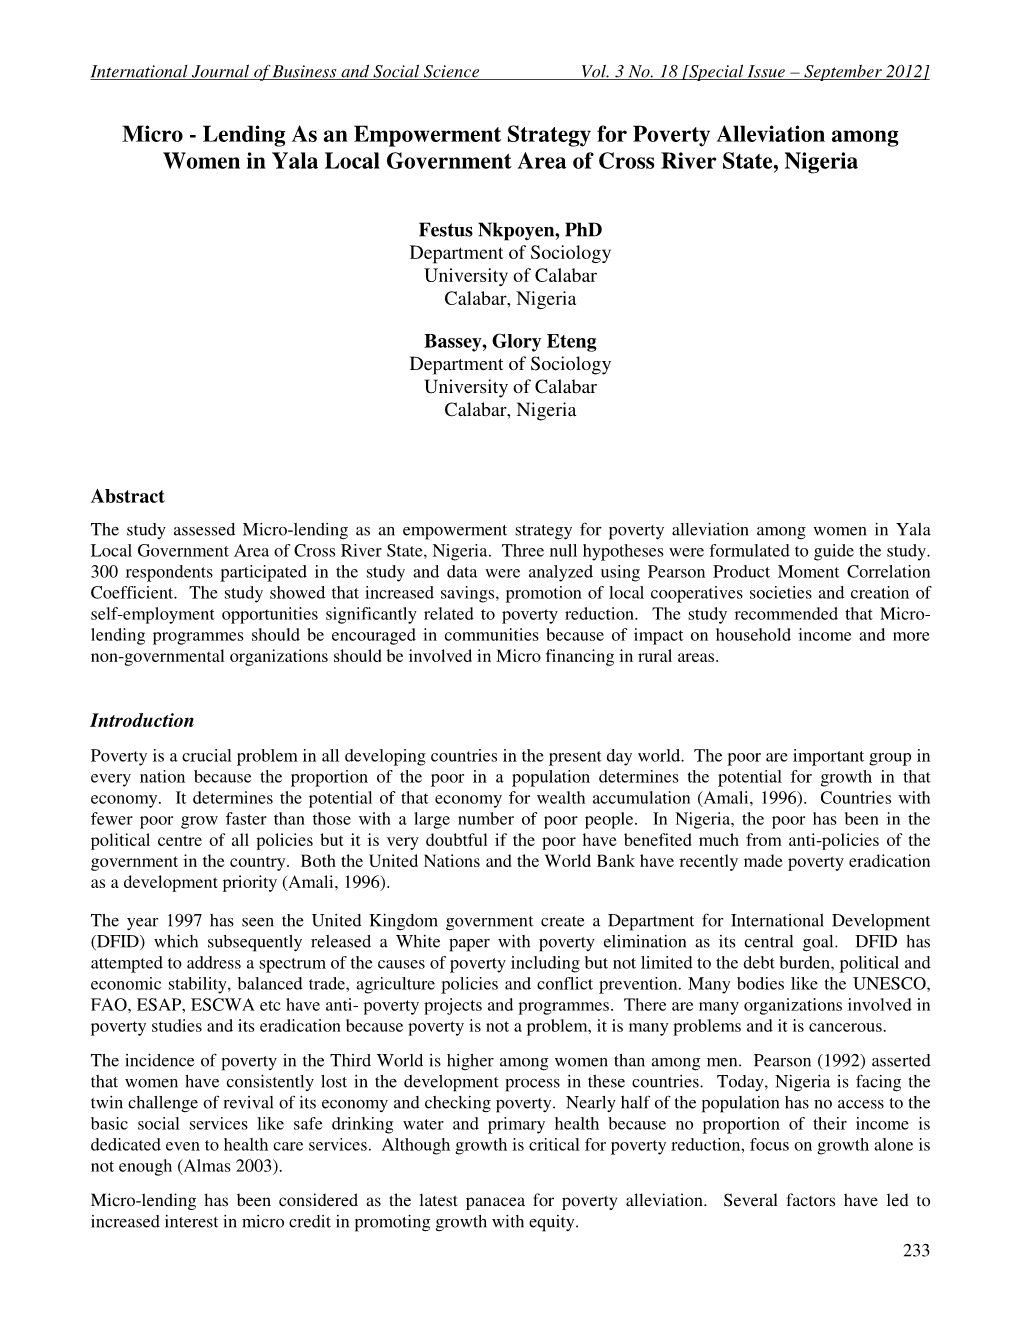 Micro - Lending As an Empowerment Strategy for Poverty Alleviation Among Women in Yala Local Government Area of Cross River State, Nigeria